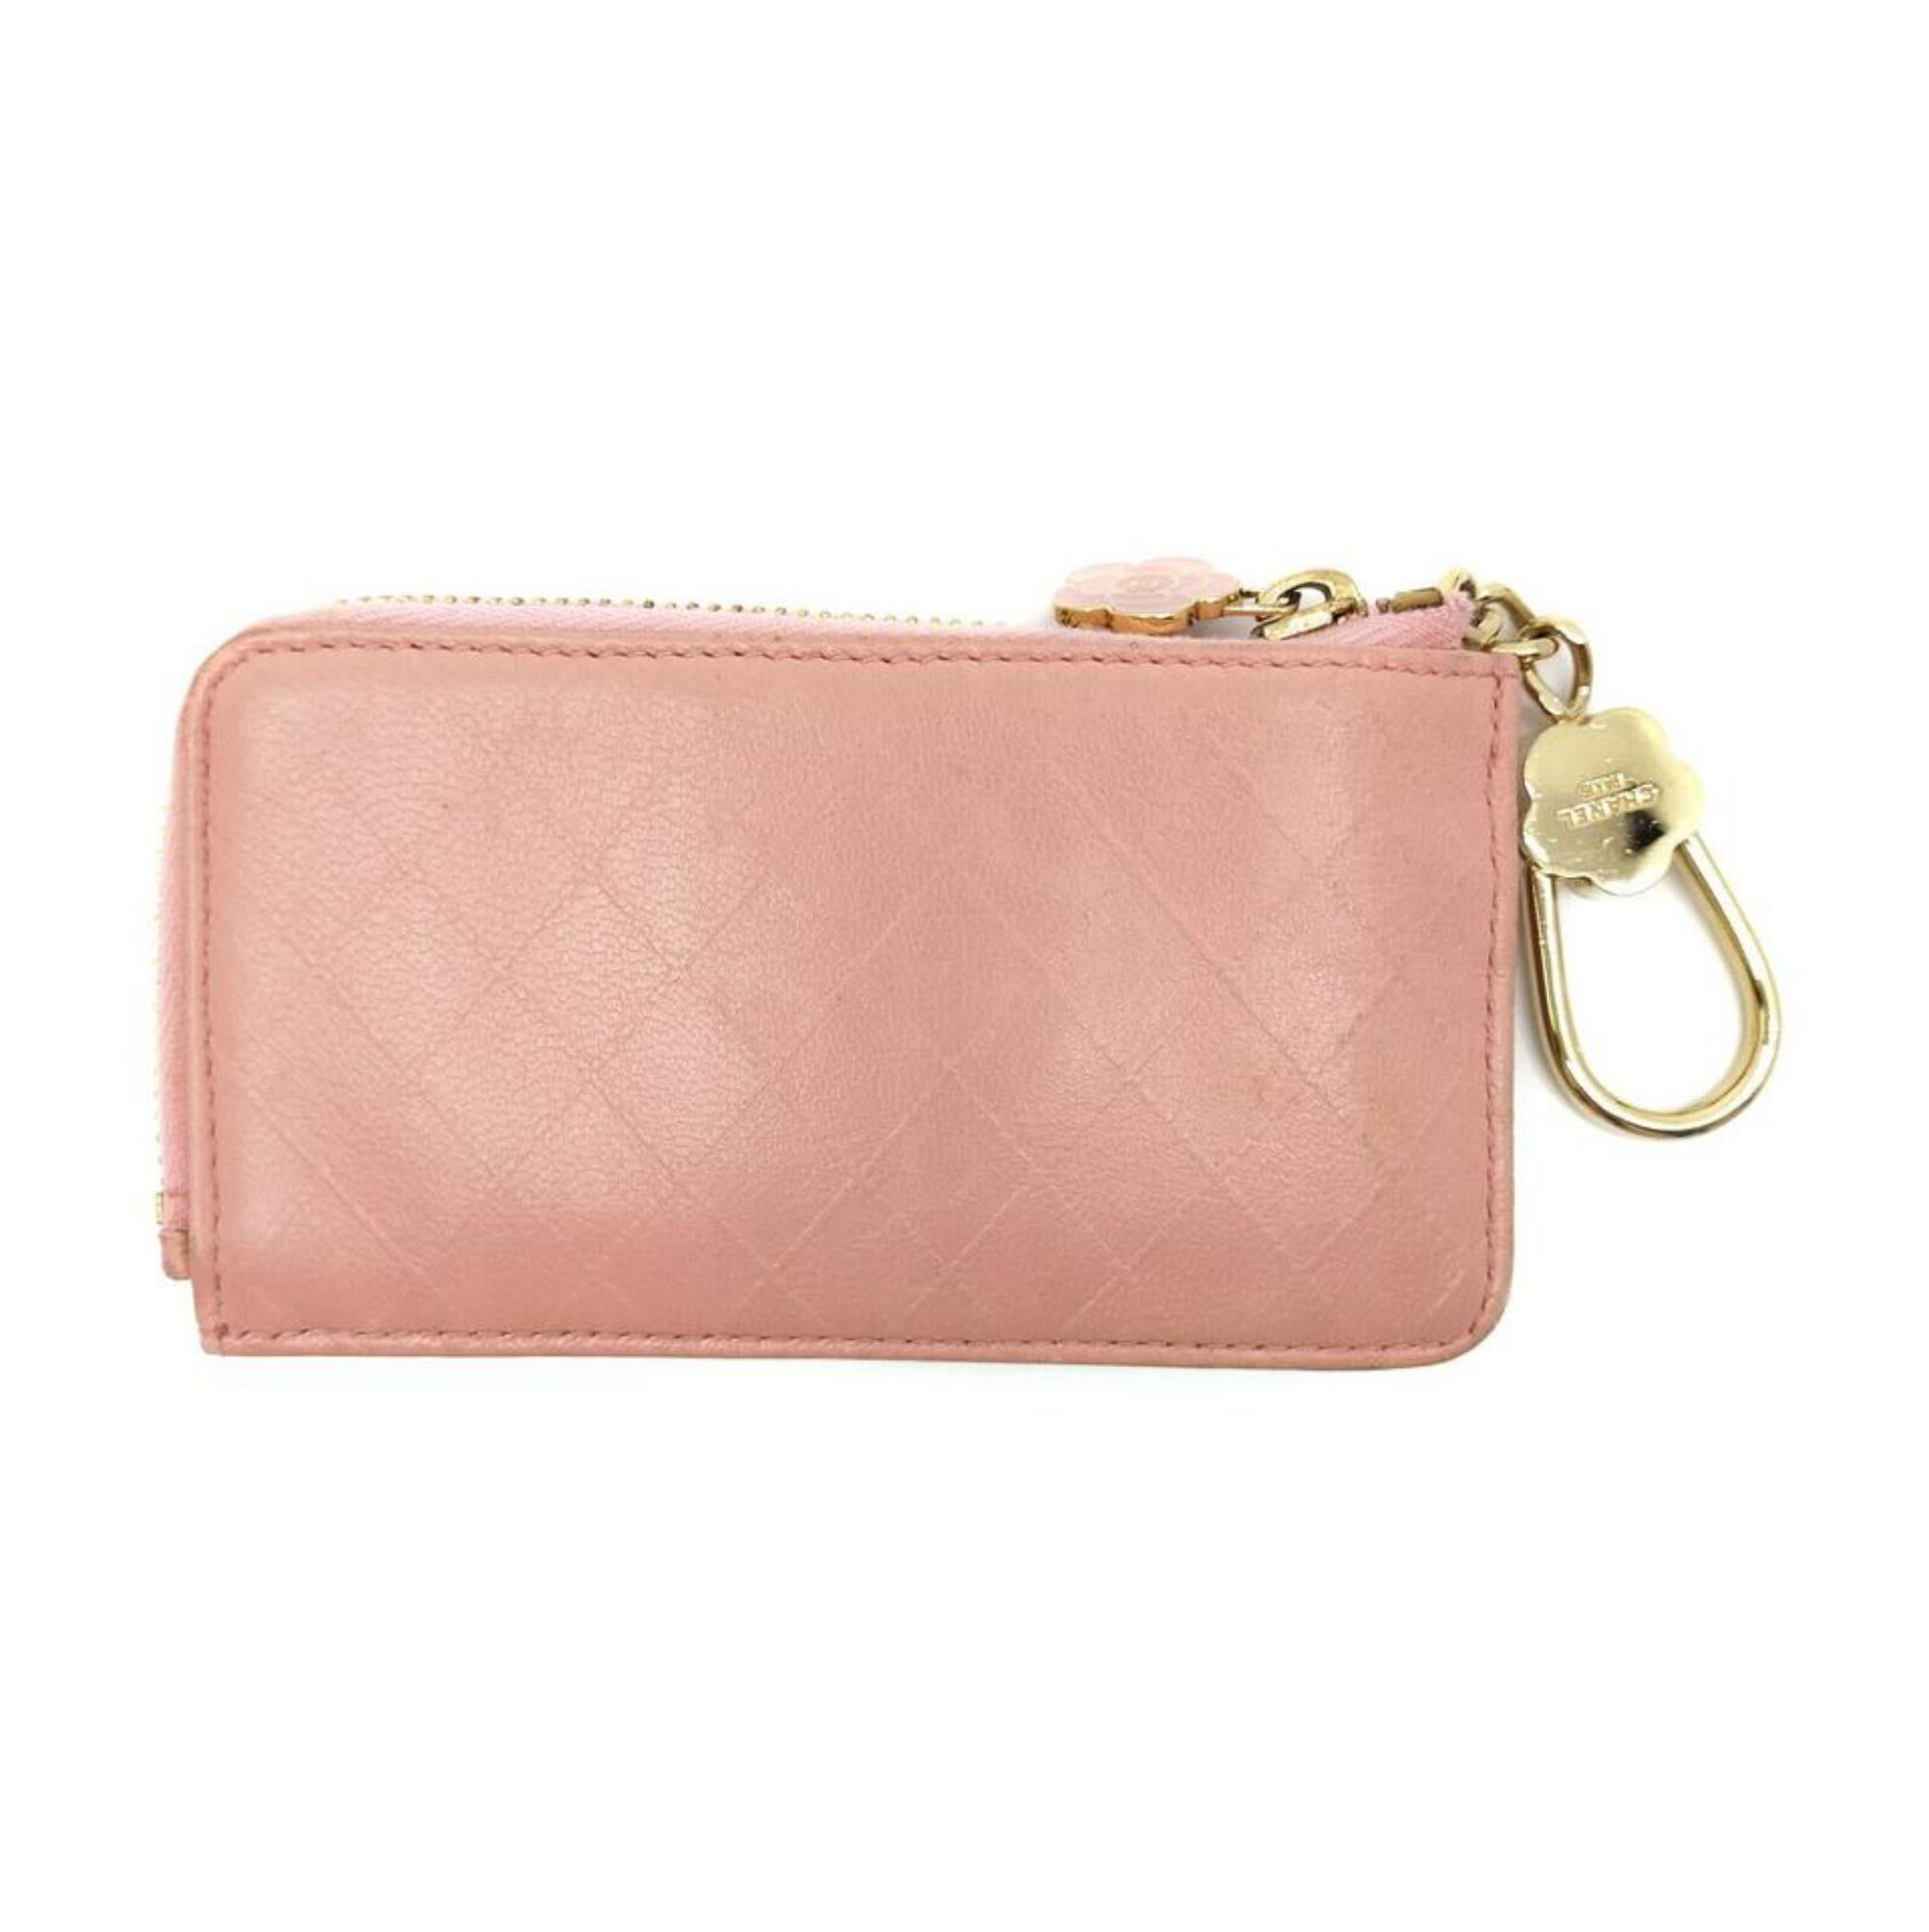 Chanel Pink Quilted Leather Coin Purse Key Chain Pouch 72ck322s
GOOD+ CONDITION
(7.25/10 or B+)
Includes Serial Seal Sticker

(Outside) Minor marks and Rubs

(Inside) minor marks in the note compartments

(zipper) Zipper works properly





Width